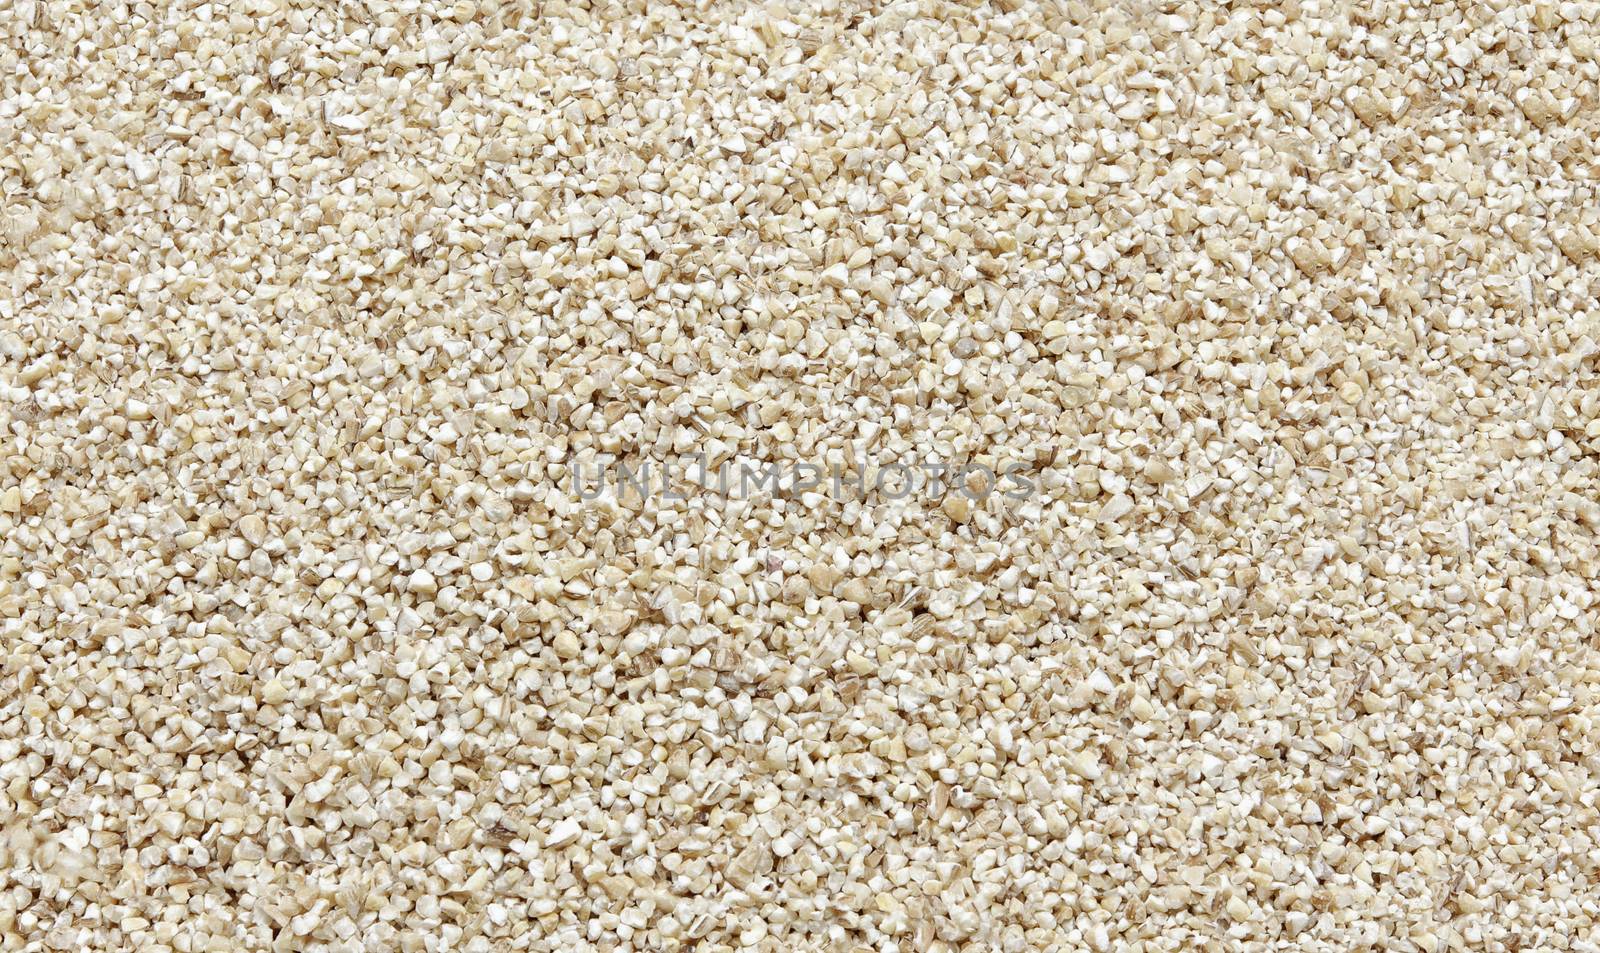 Crushed pearled barley -texture and details - traditional food, closeup